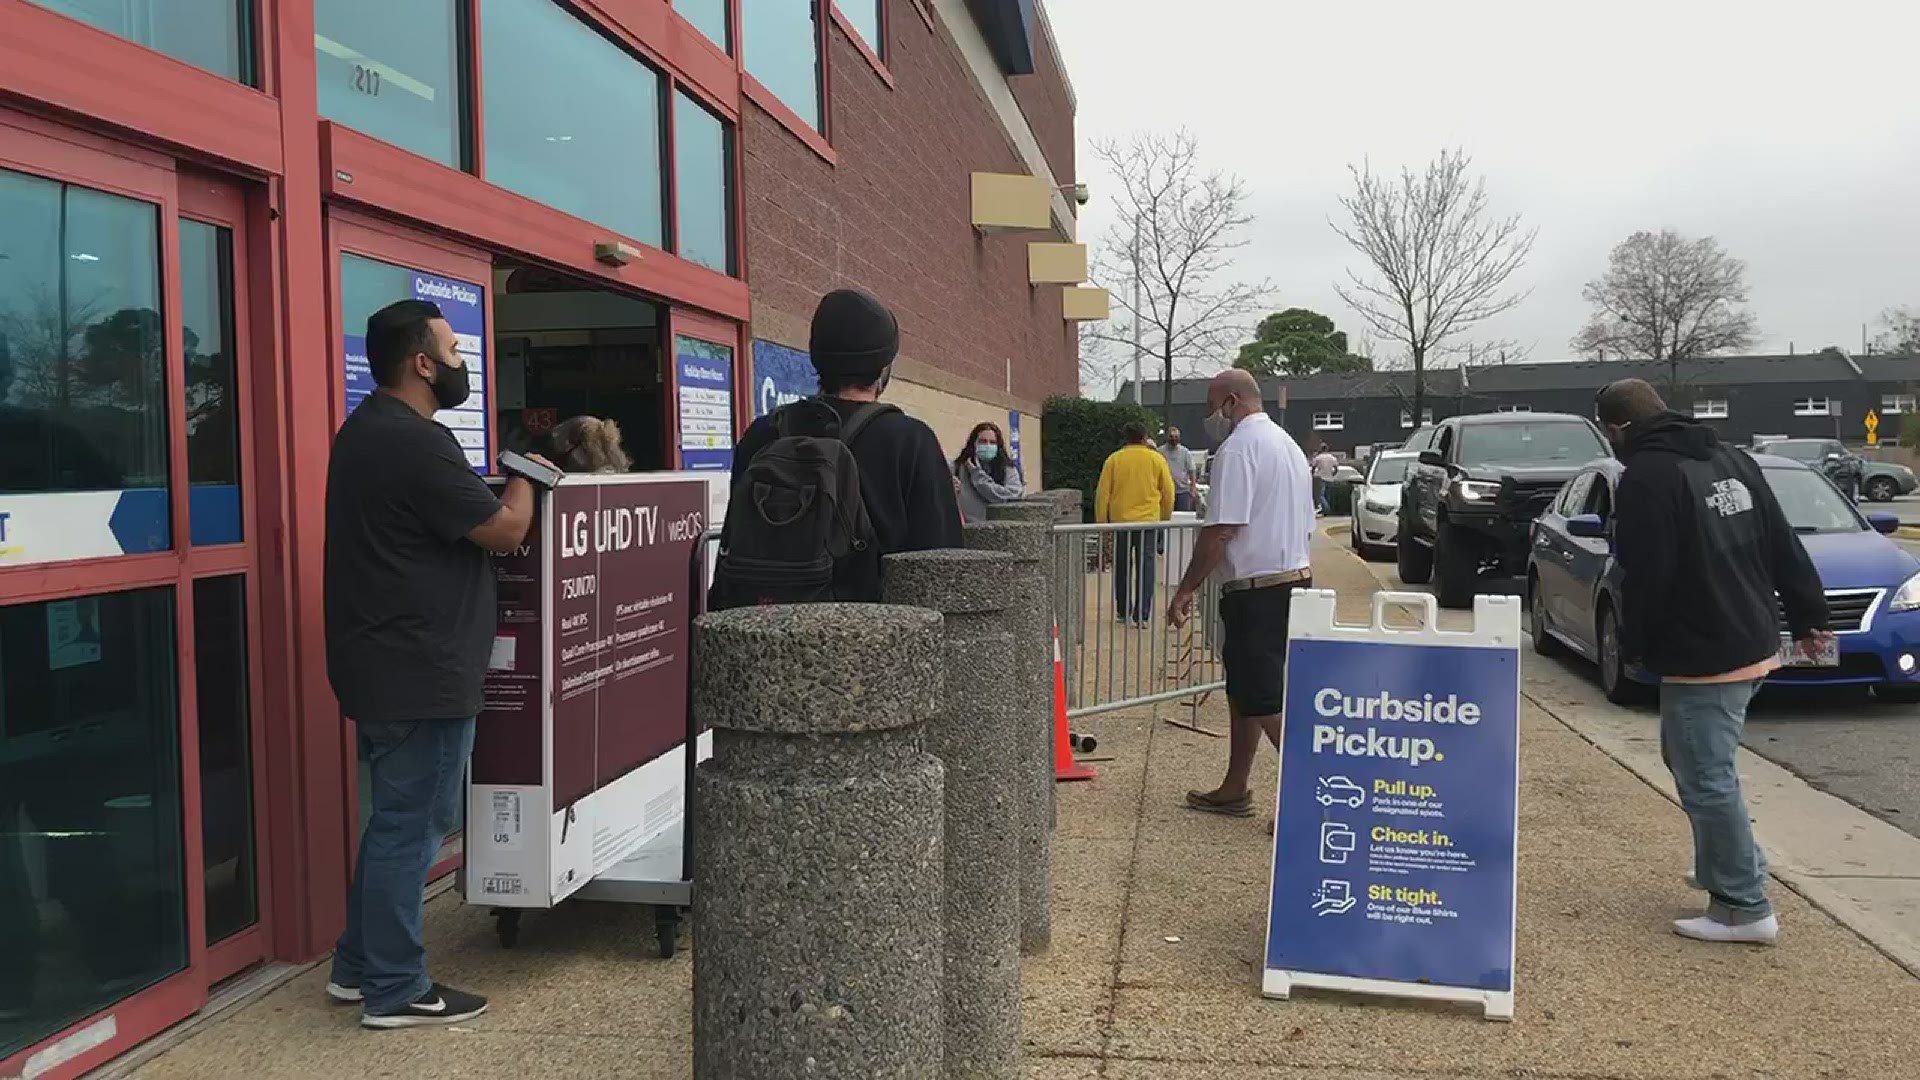 The pandemic didn't stop the Black Friday  shopping at Best Buy on Independence Boulevard on Nov. 27, 2020. Curbside pickup wrapped around the building.